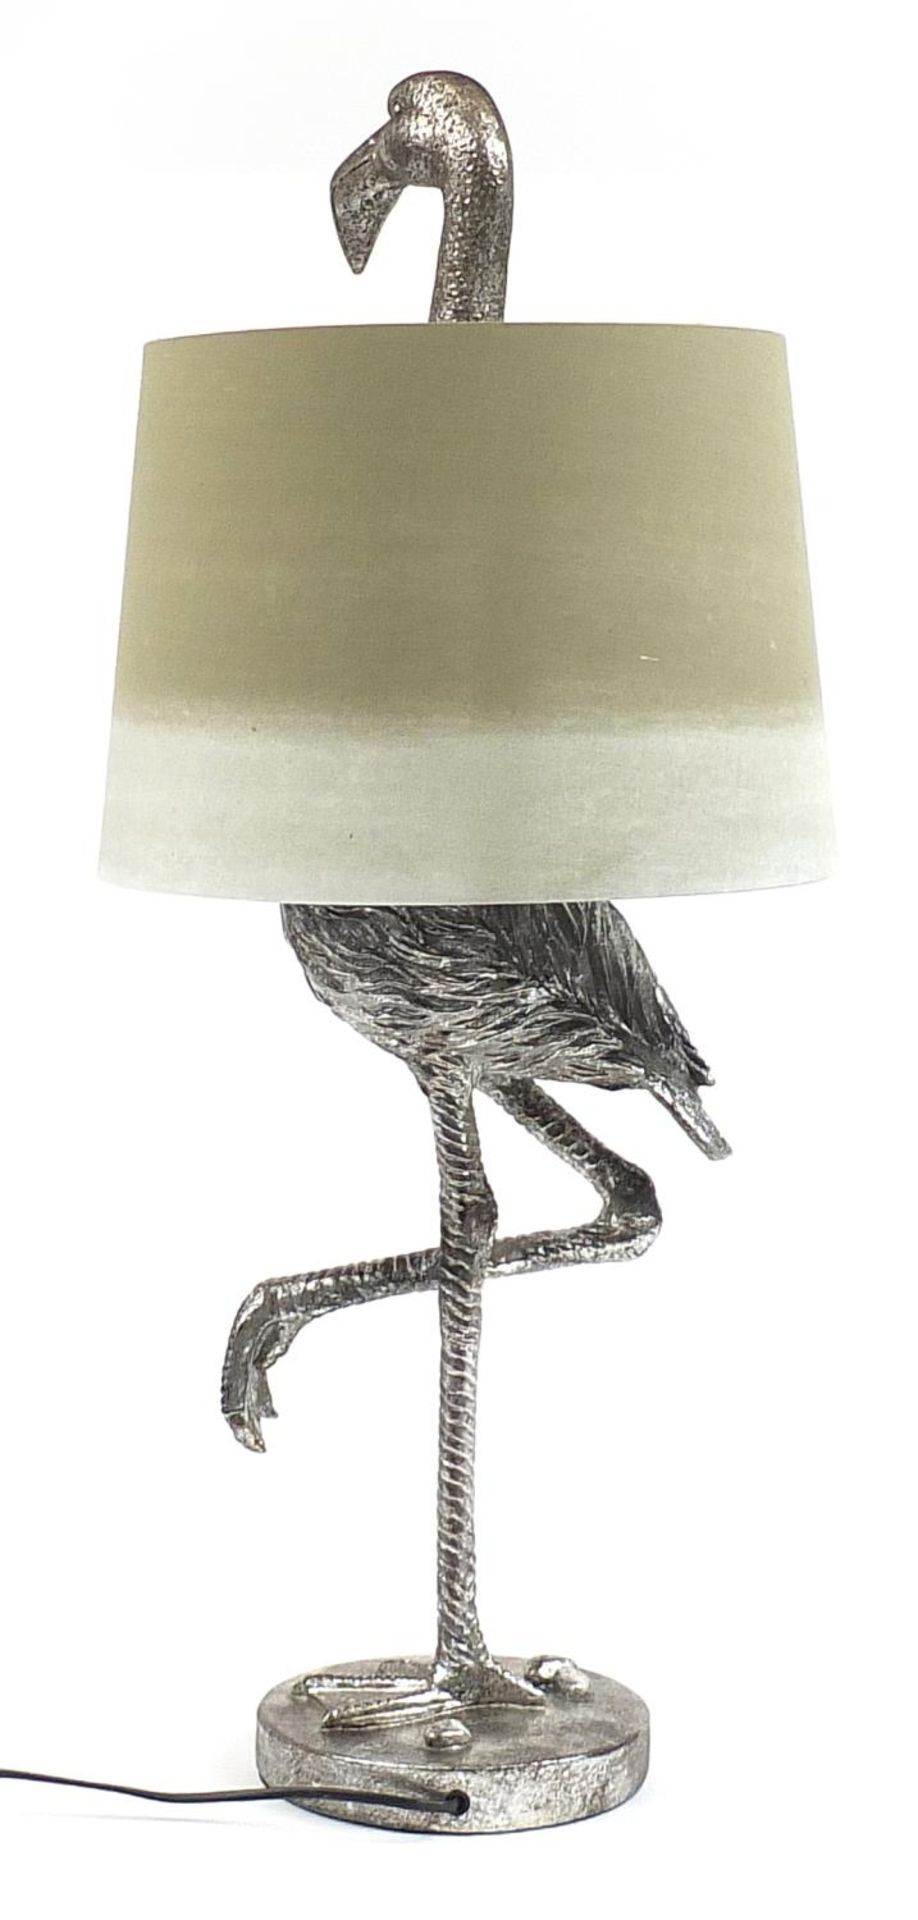 Silvered flamingo design table lamp with shade, 82cm high - Image 2 of 3